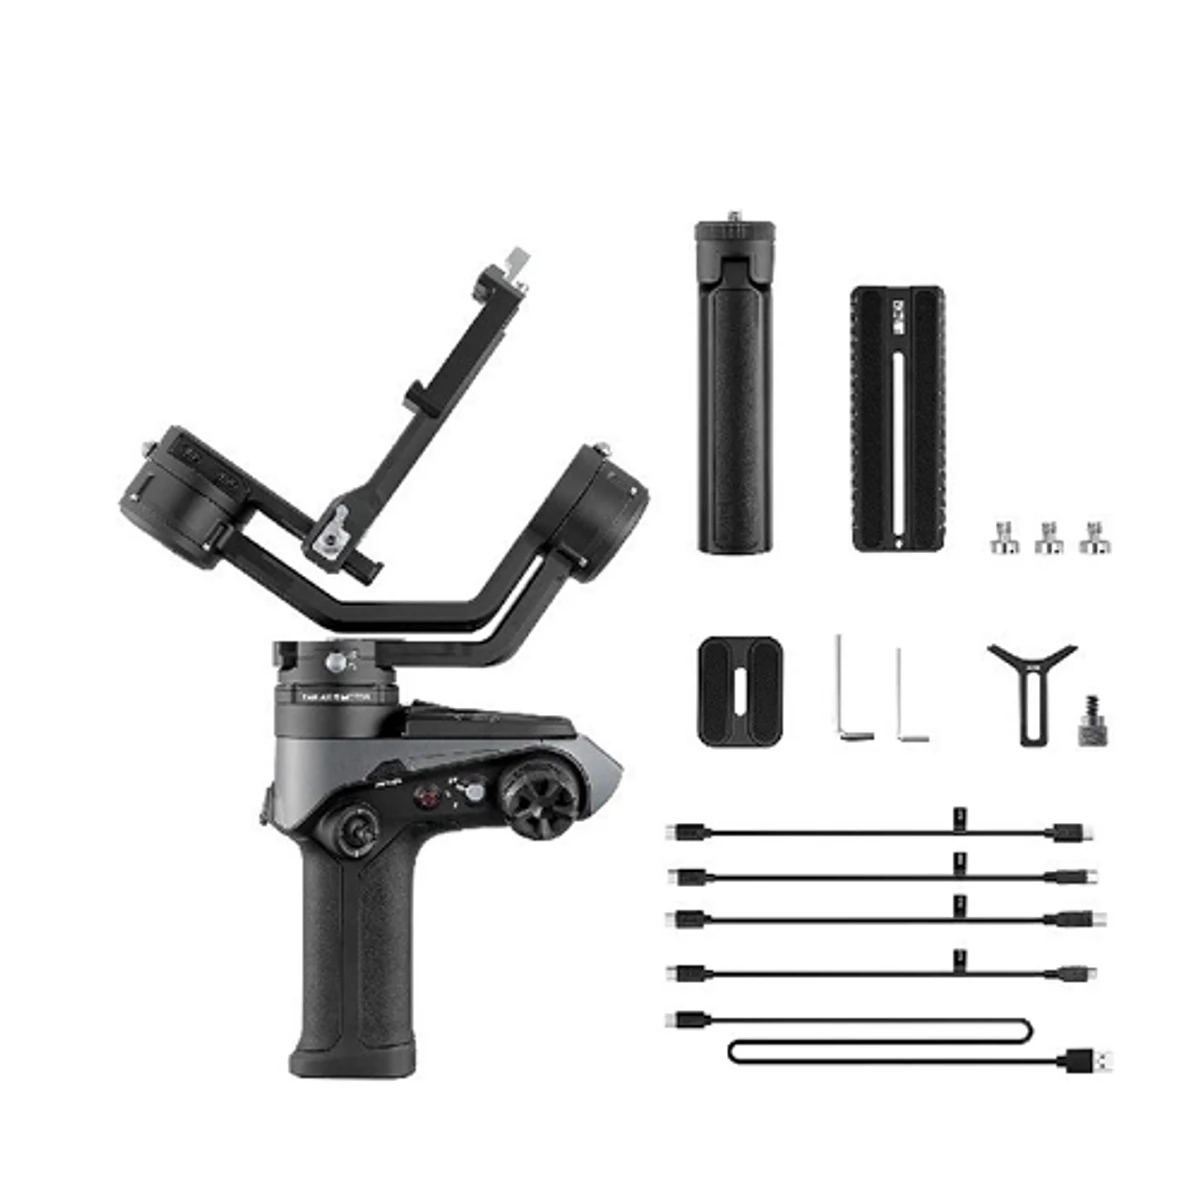 Zhiyun Weebill 2 3-Axis Gimbal Stabilizer With Rotating Touchscreen For DSLR And Mirrorless Camera